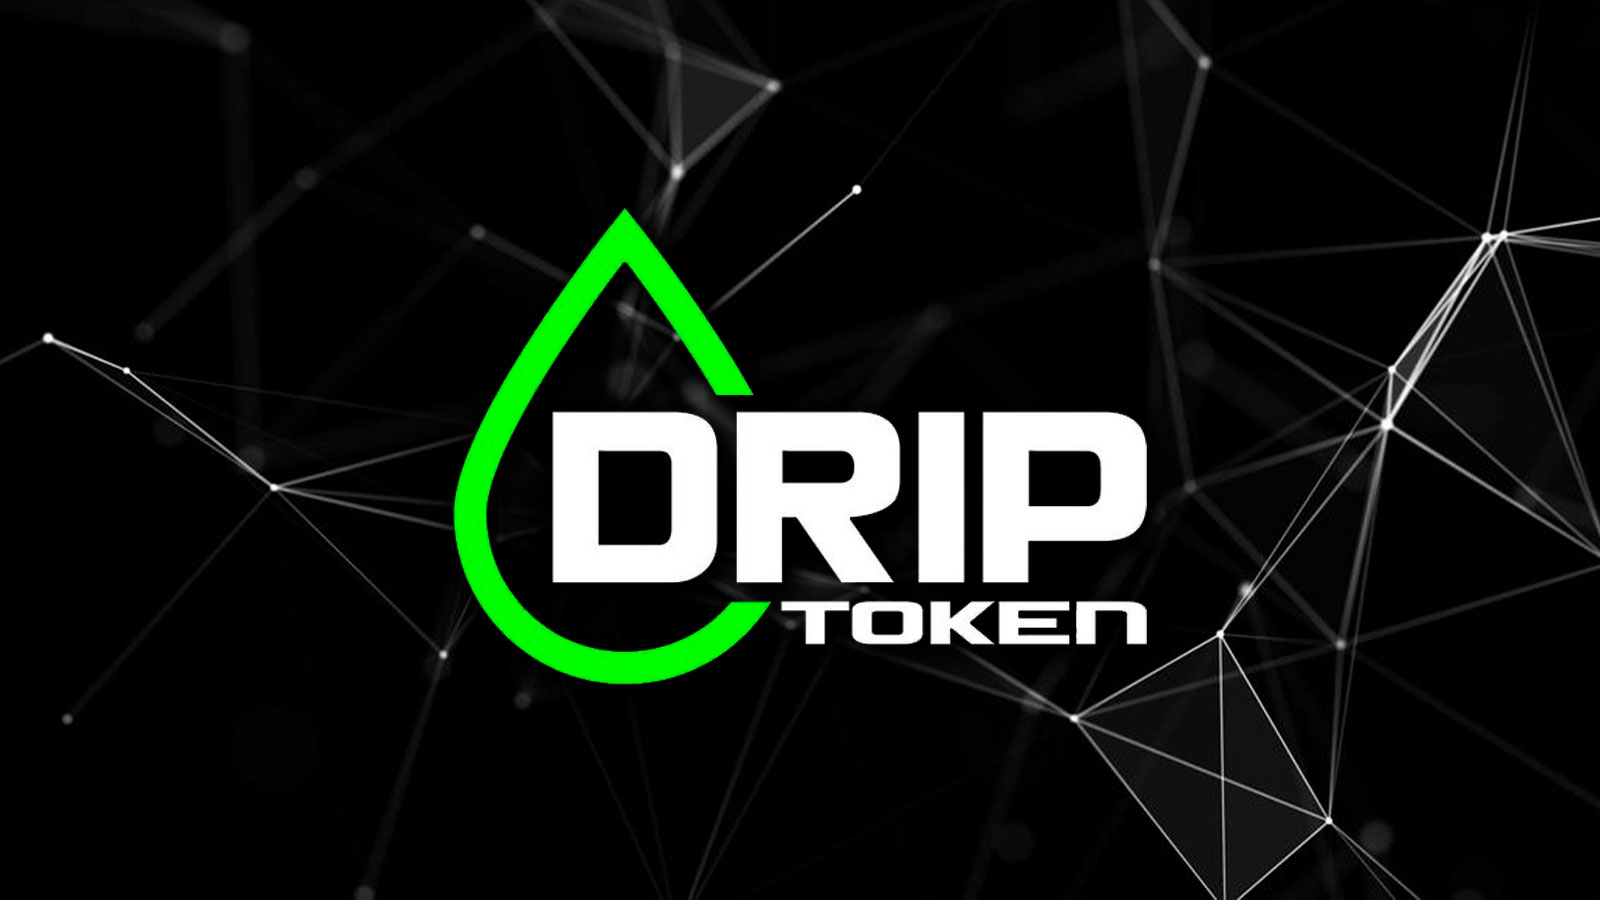 $DRIP Token Started Its Ambitious Presale on PinkSale